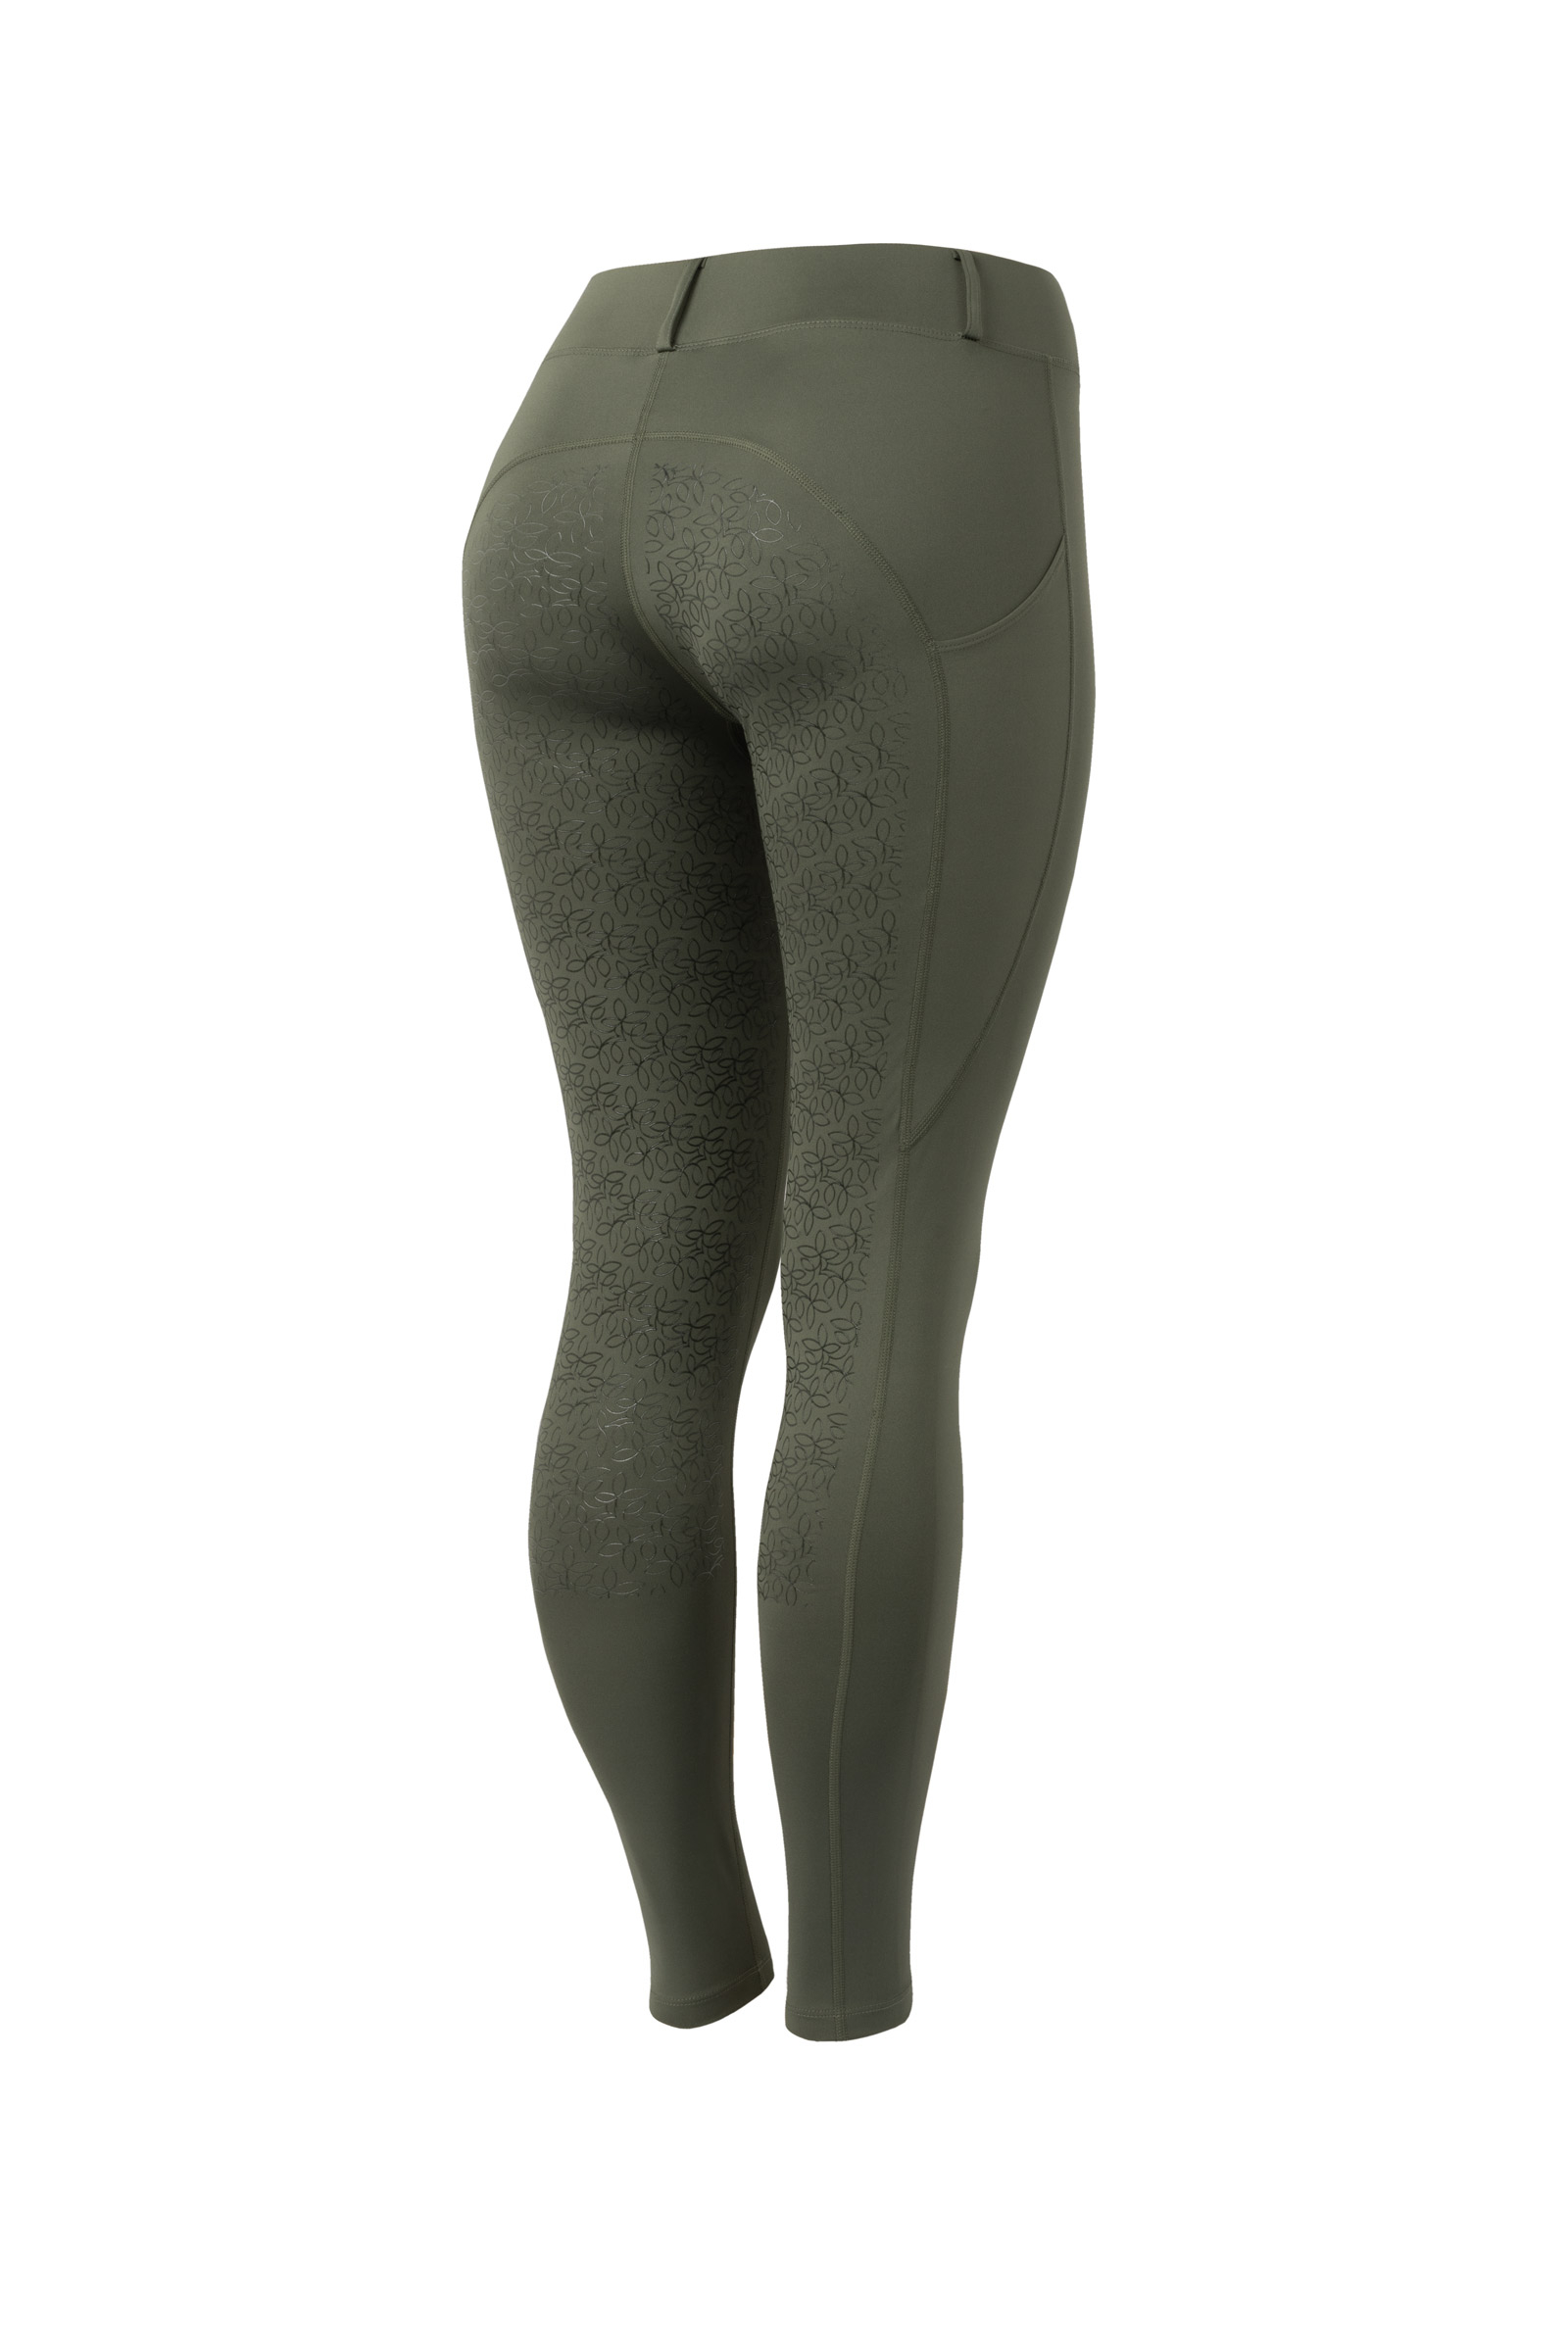 Horze Sara Organic Cotton Tights at Tractor Supply Co.